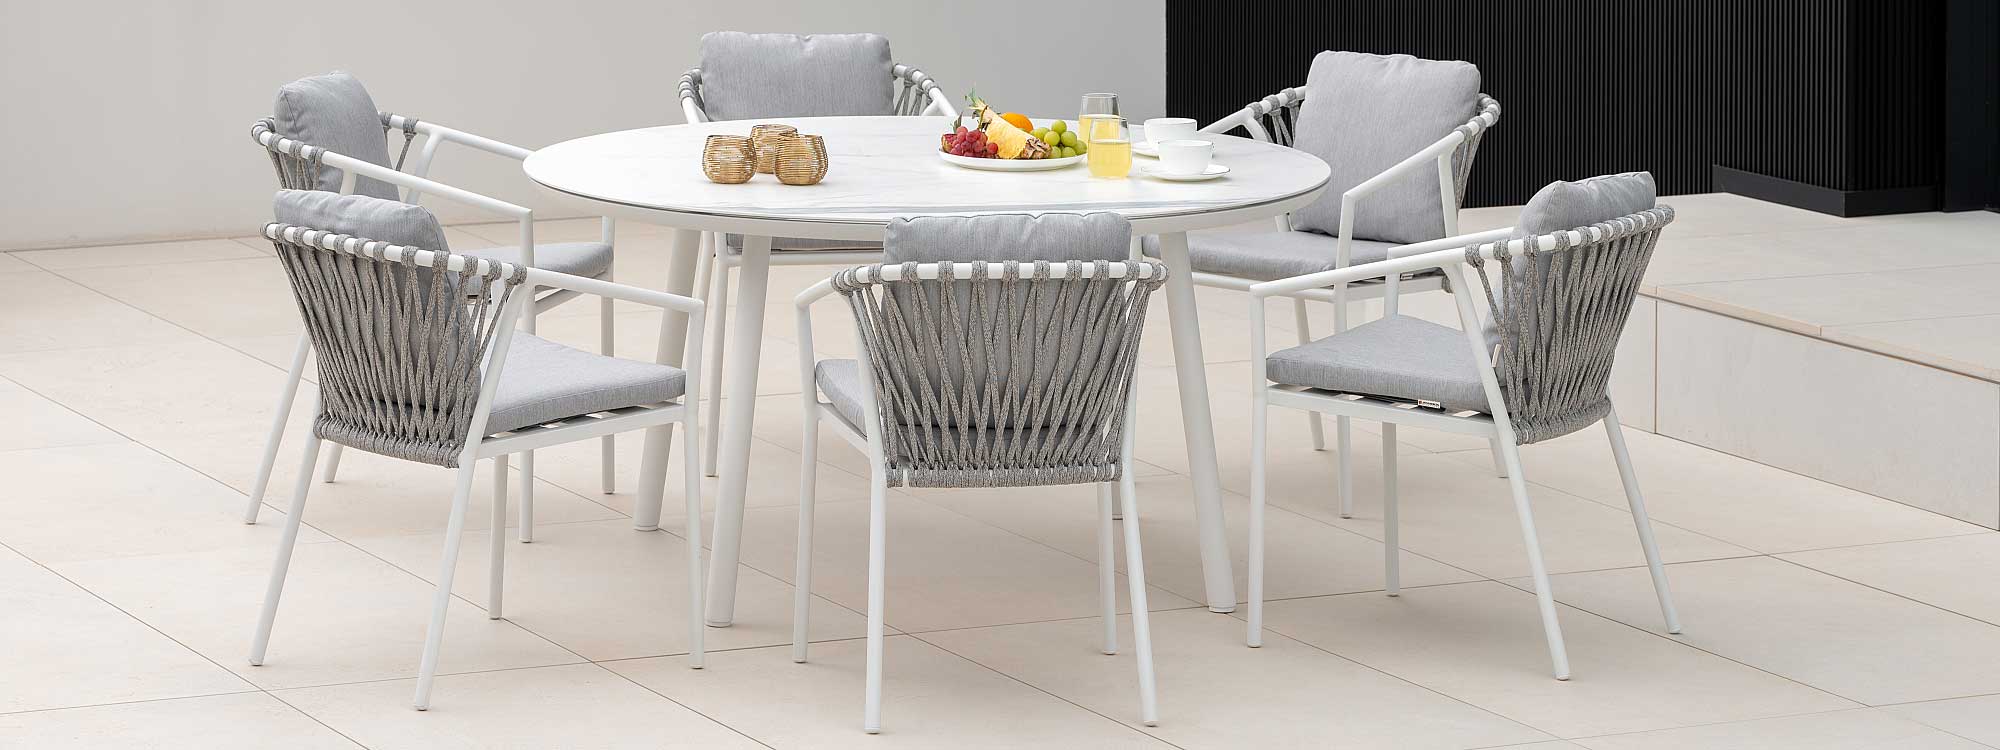 Image of white Kapra garden chairs around Durham round garden dining table, with bowl of fruit and drinks placed on the table top